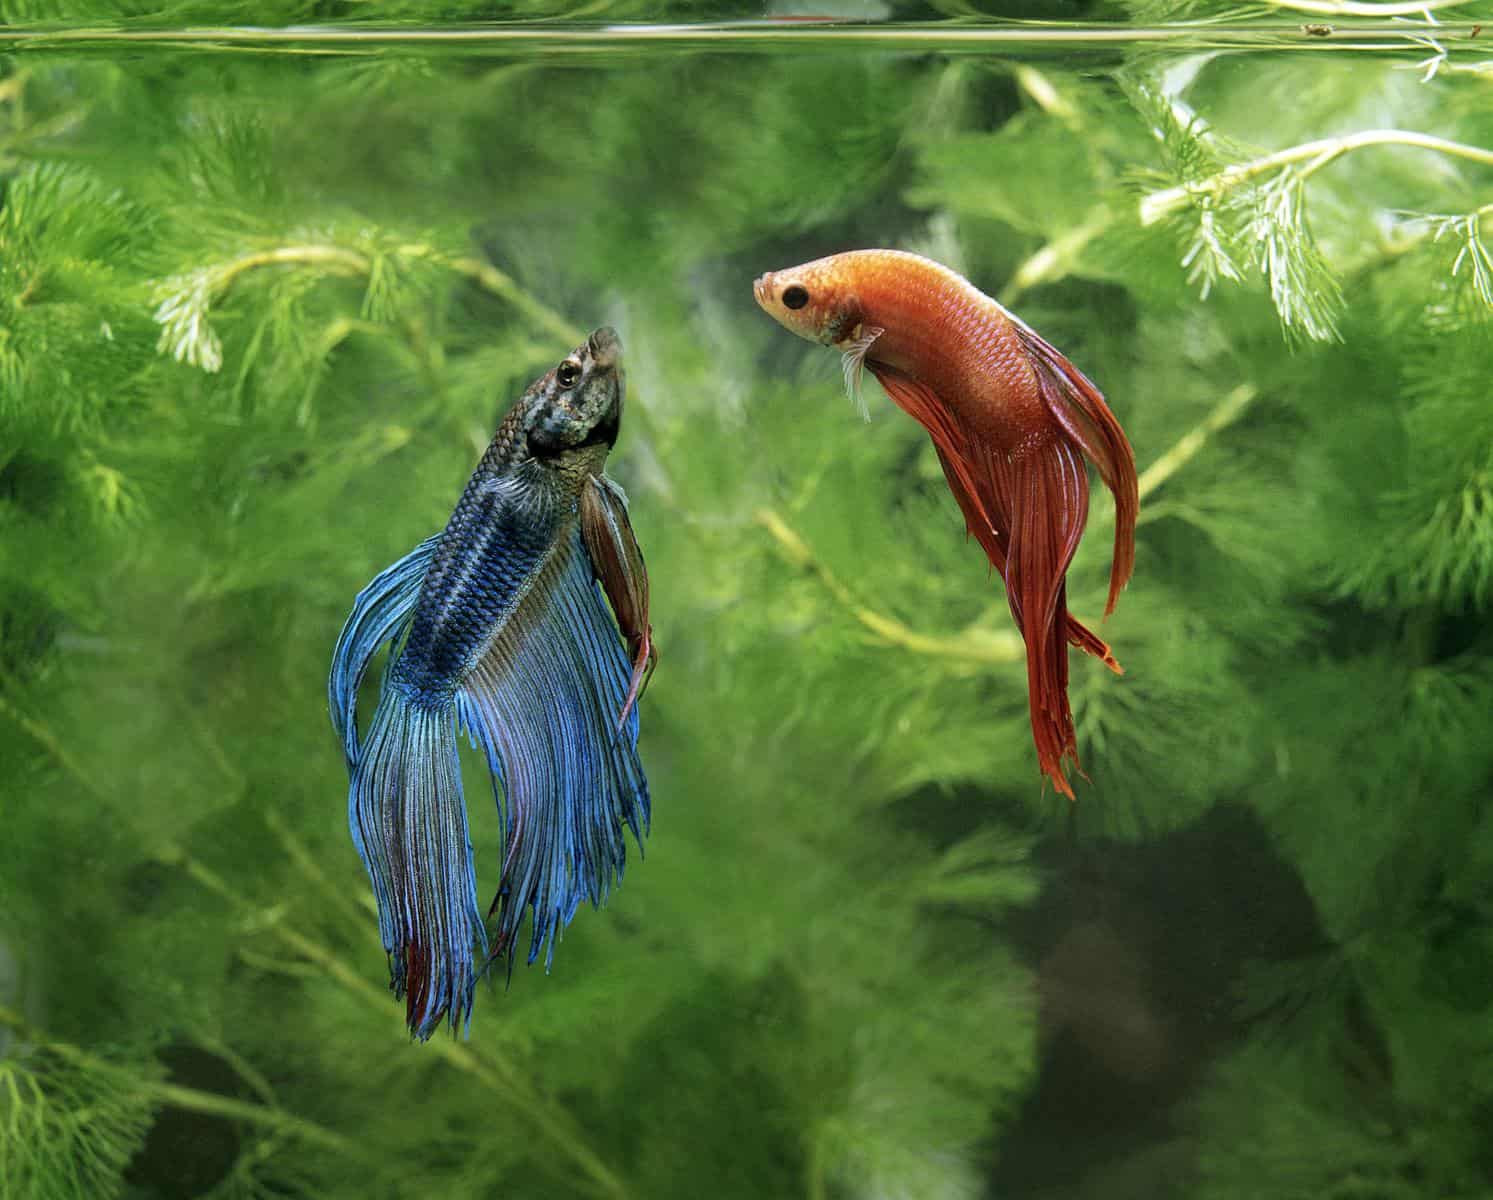 Can 2 Female Betta Fish Live Together? 2